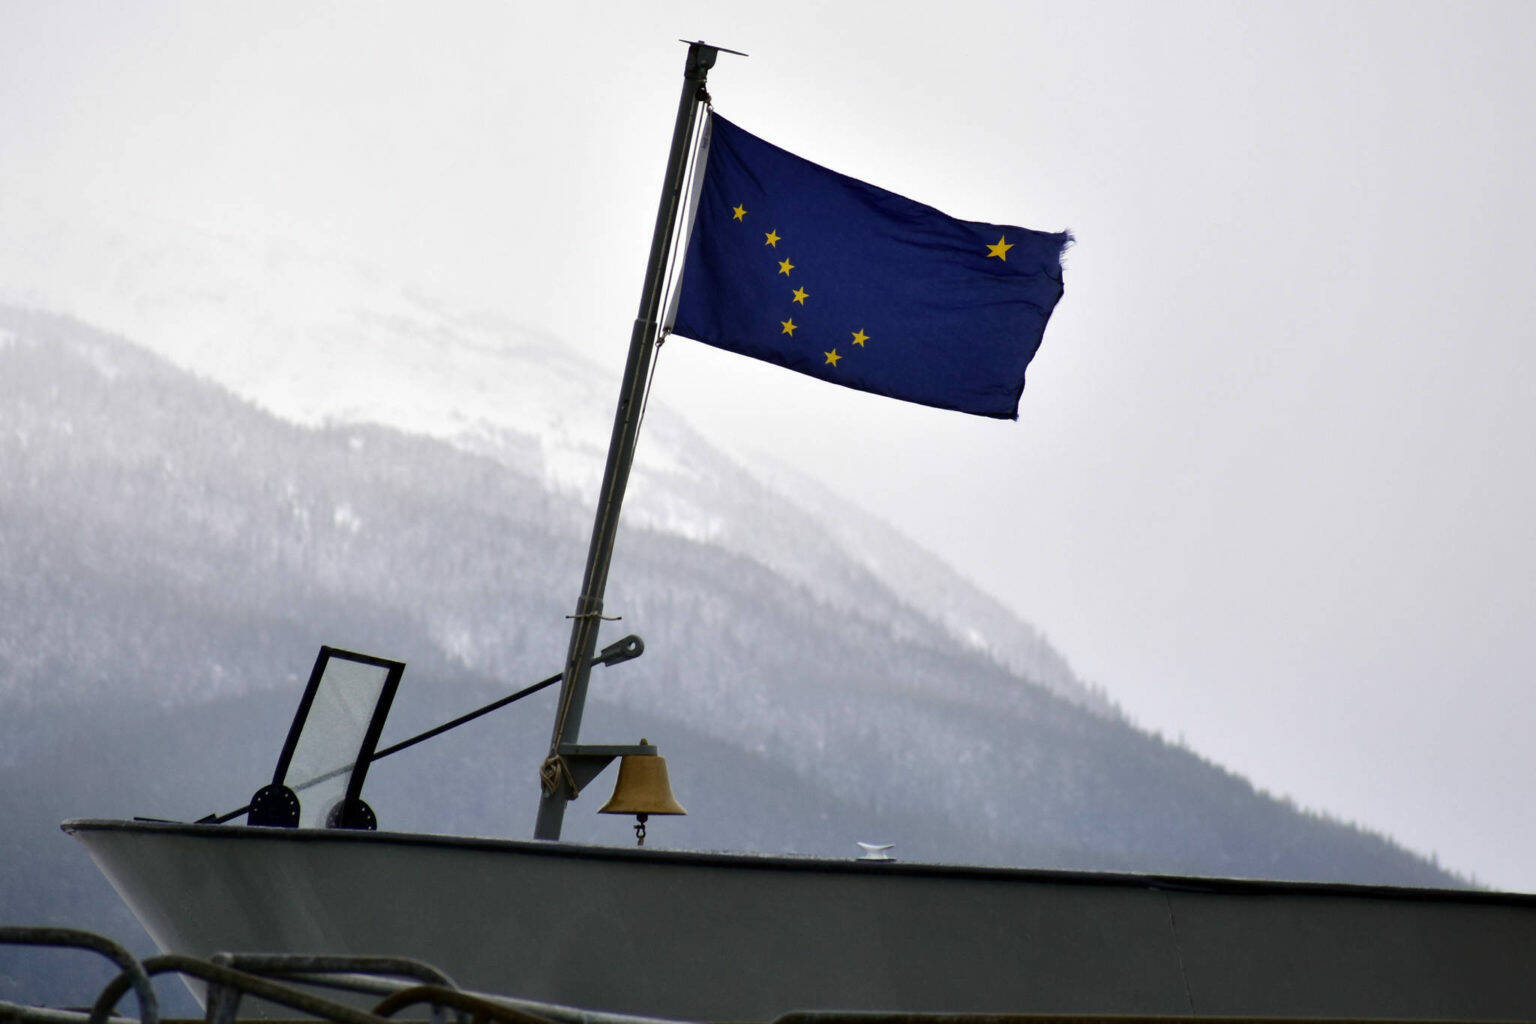 This February 2020 file photo shows the Alaska state flag on the bow of the MV Matanuska at the Auke Bay Ferry Terminal. The infrastructure bill recently passed by Congress includes significant funding for the ferry system, but coastal communities are still feeling the pinch of reduced service. (Peter Segall / Juneau Empire file)